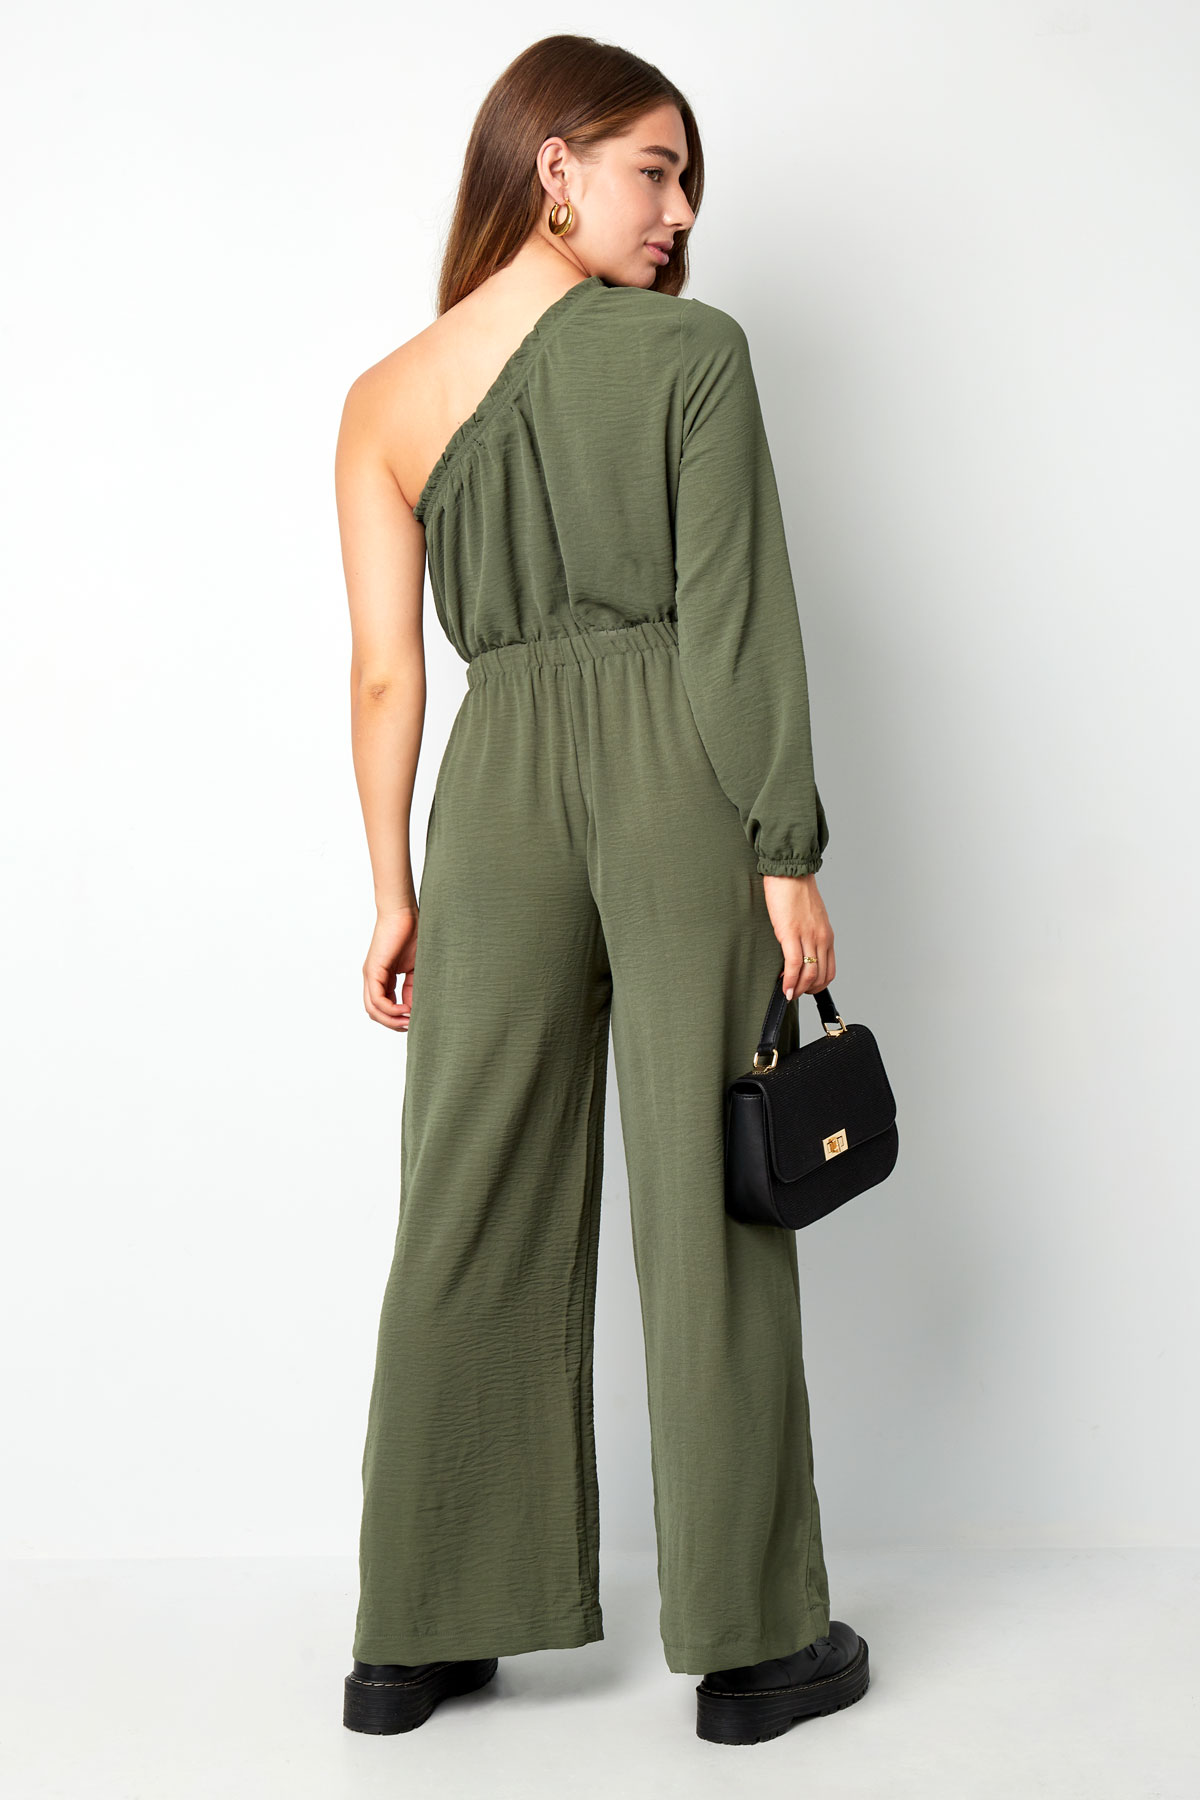 Jumpsuit one-shoulder - mustard yellow h5 Picture9